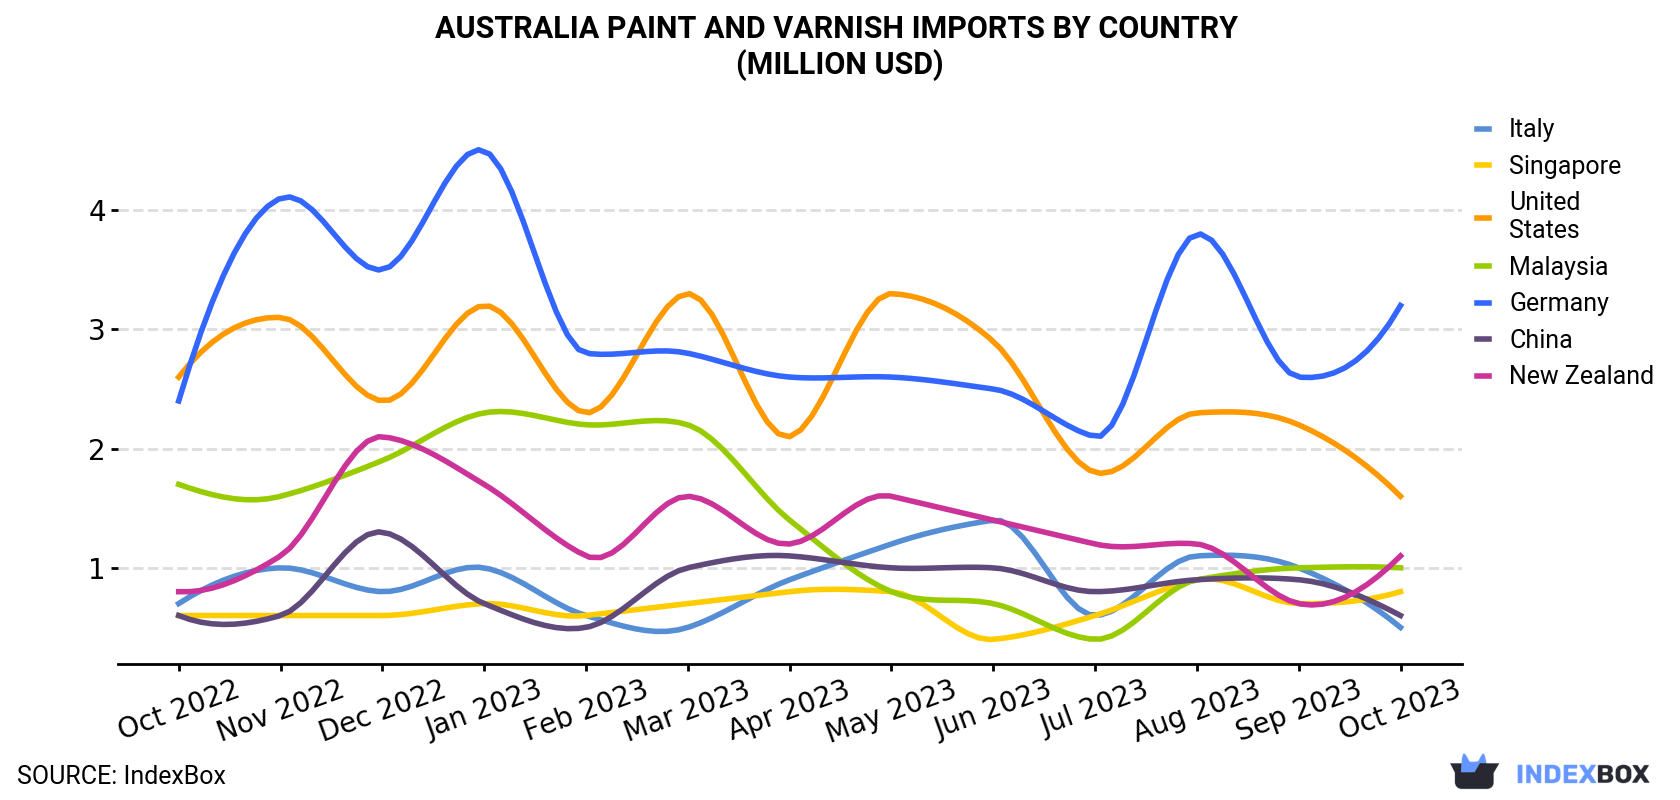 Australia Paint and Varnish Imports By Country (Million USD)